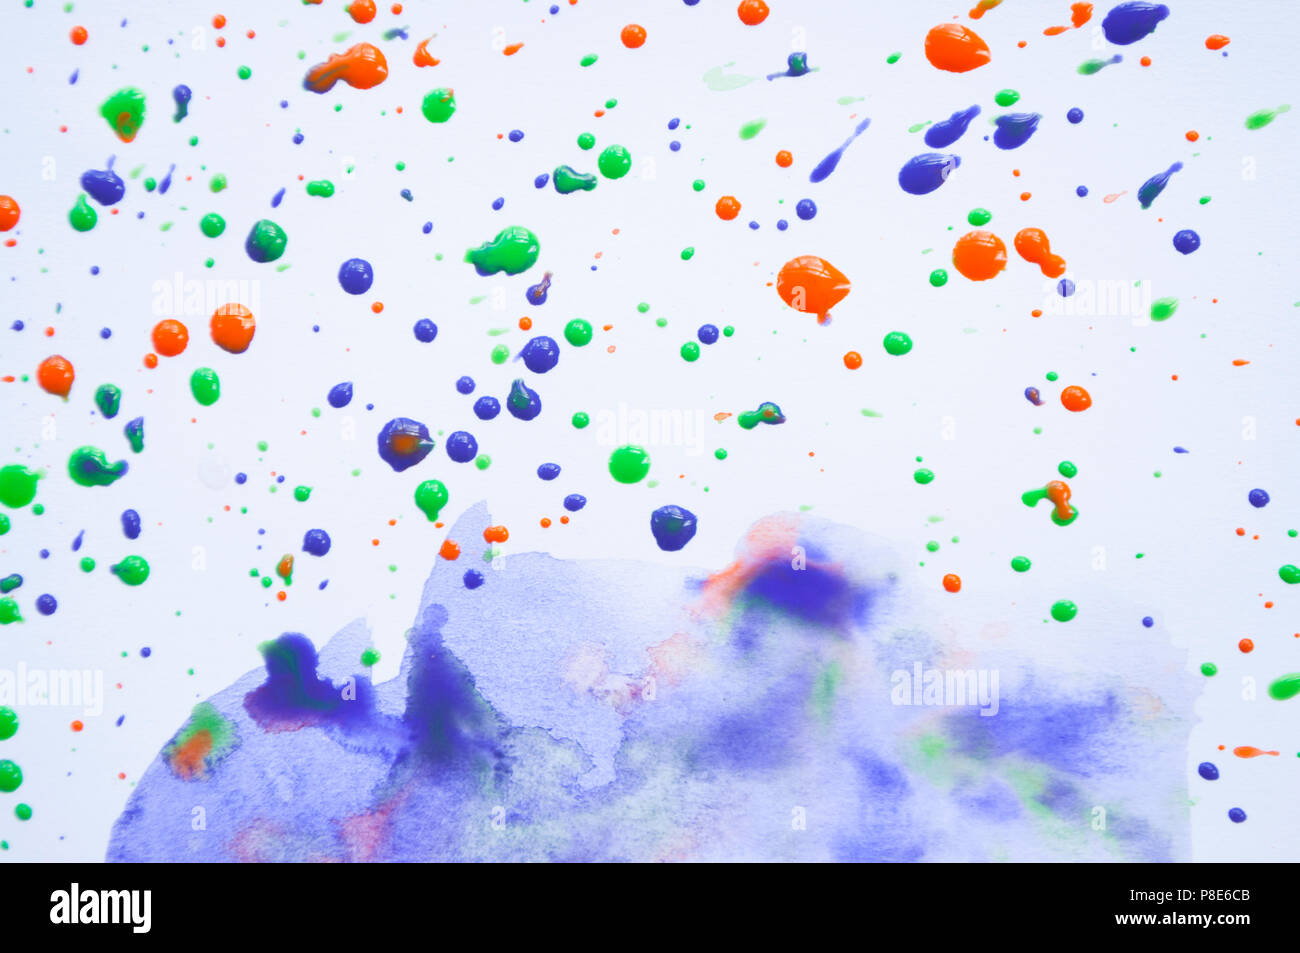 Colorful violet, green and orange watercolor splashes on white background for your design. Stock Photo